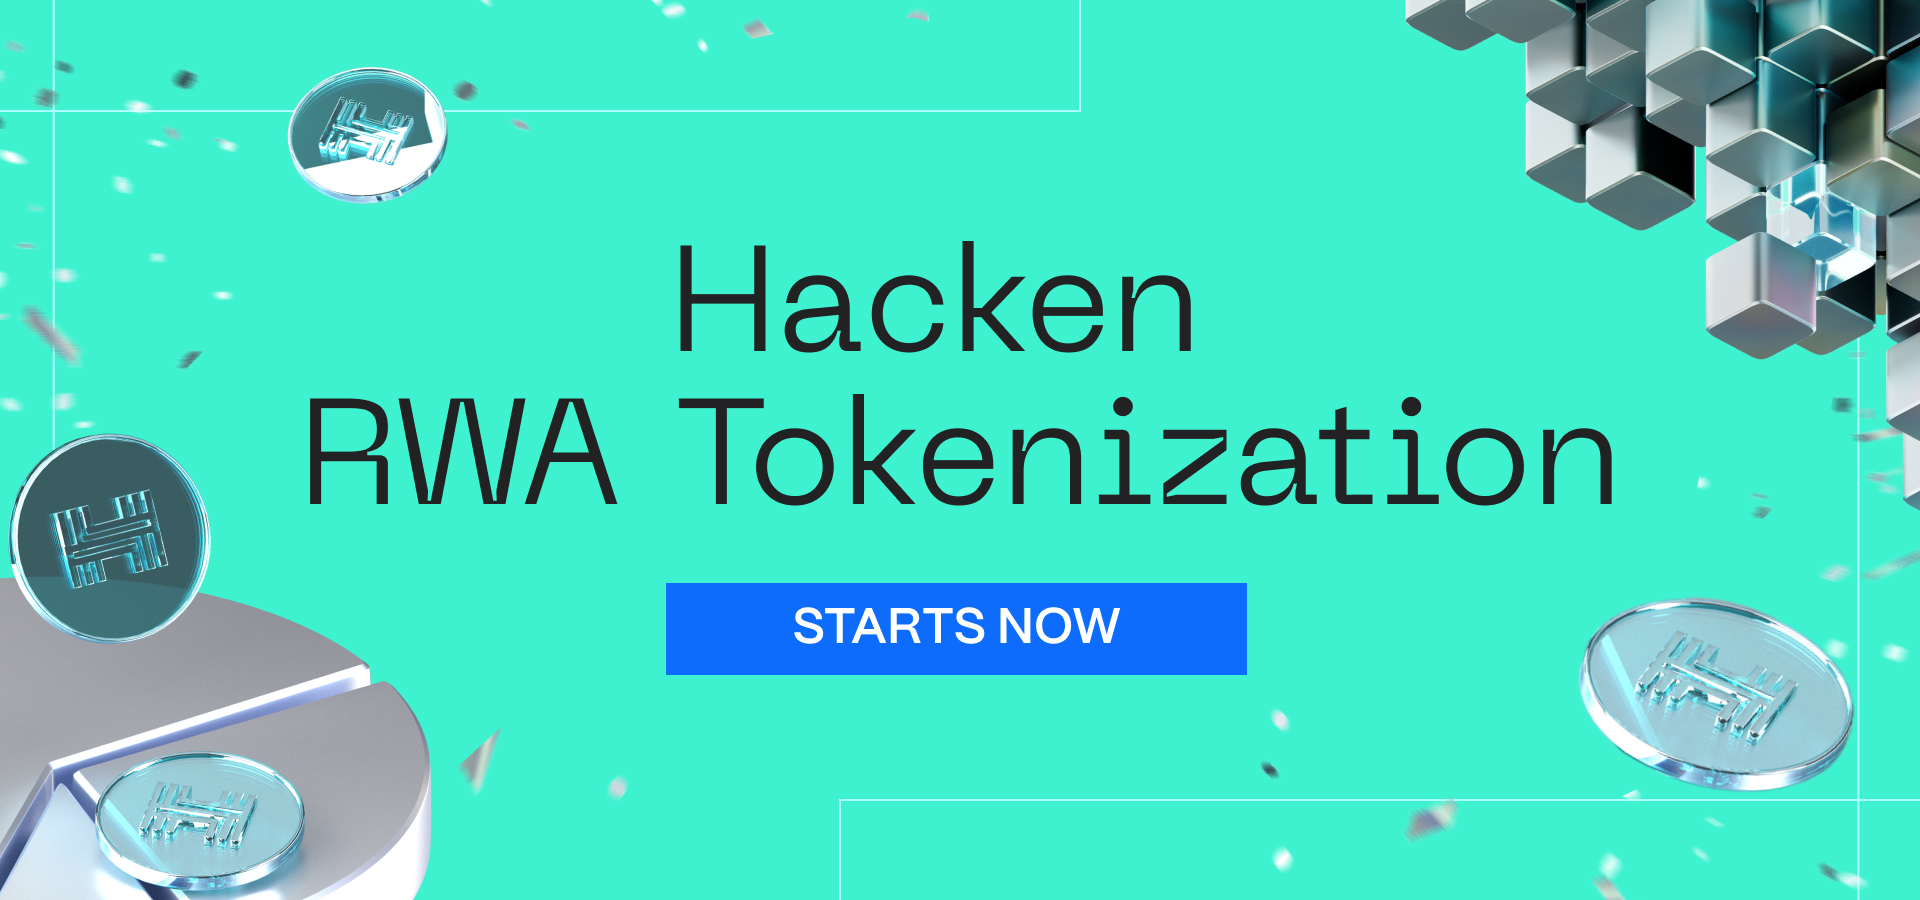 Hacken Equity Share Offering Is Finally Here!